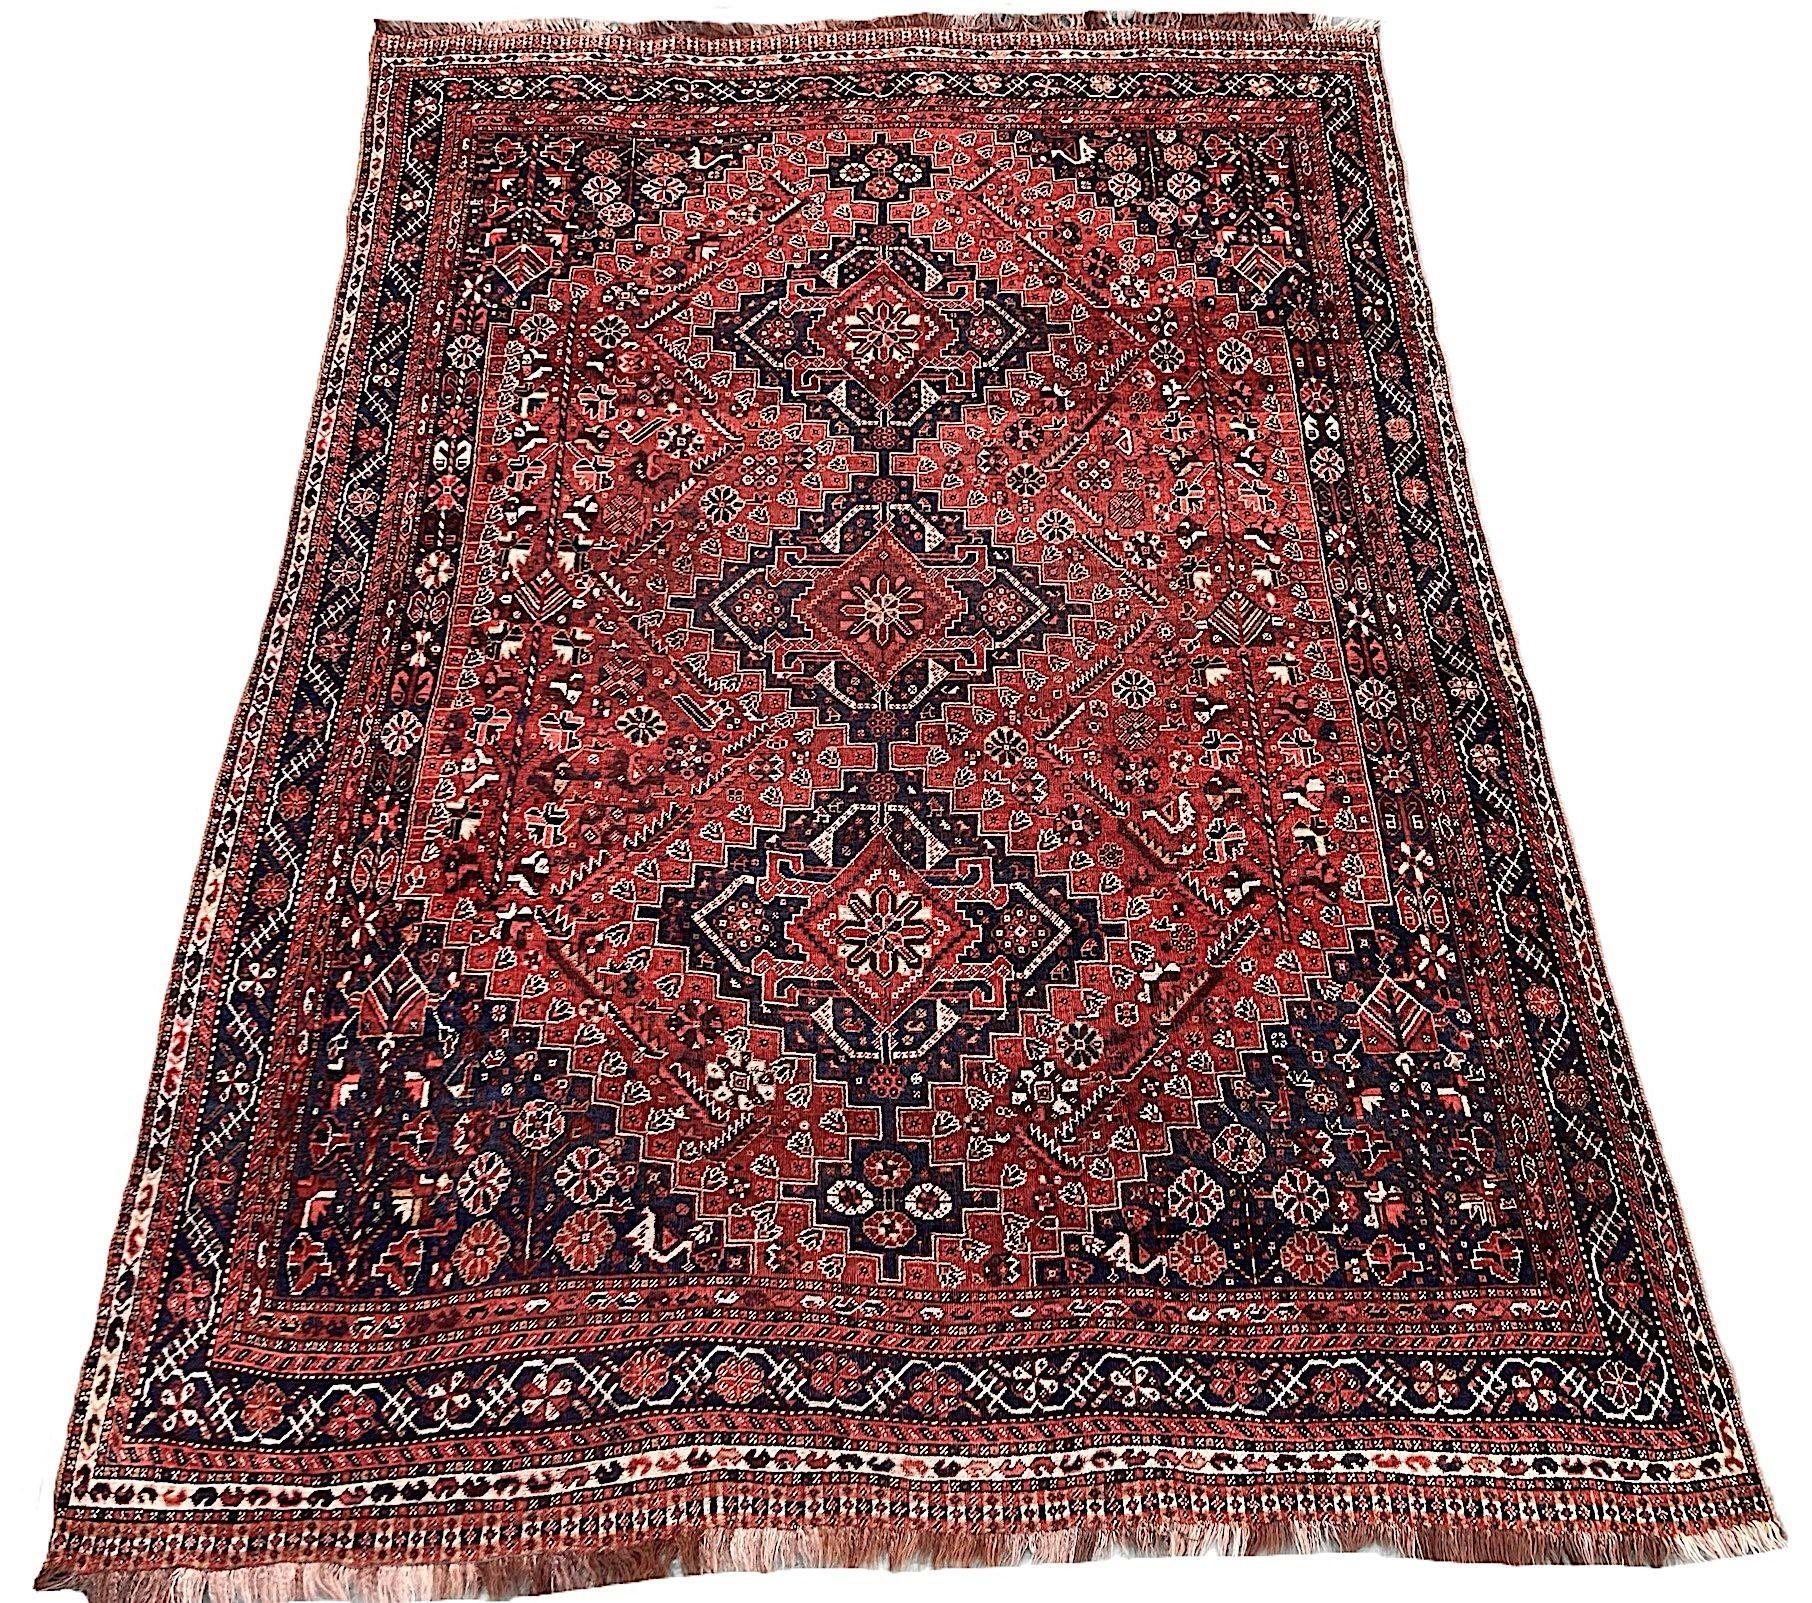 An unusually large antique Qashqai carpet, hand woven by the eponymous nomadic tribe circa 1920. The design features 3 small medallions on a terracotta field of stylised flowers and figures surrounded by an indigo border of trailing vines and